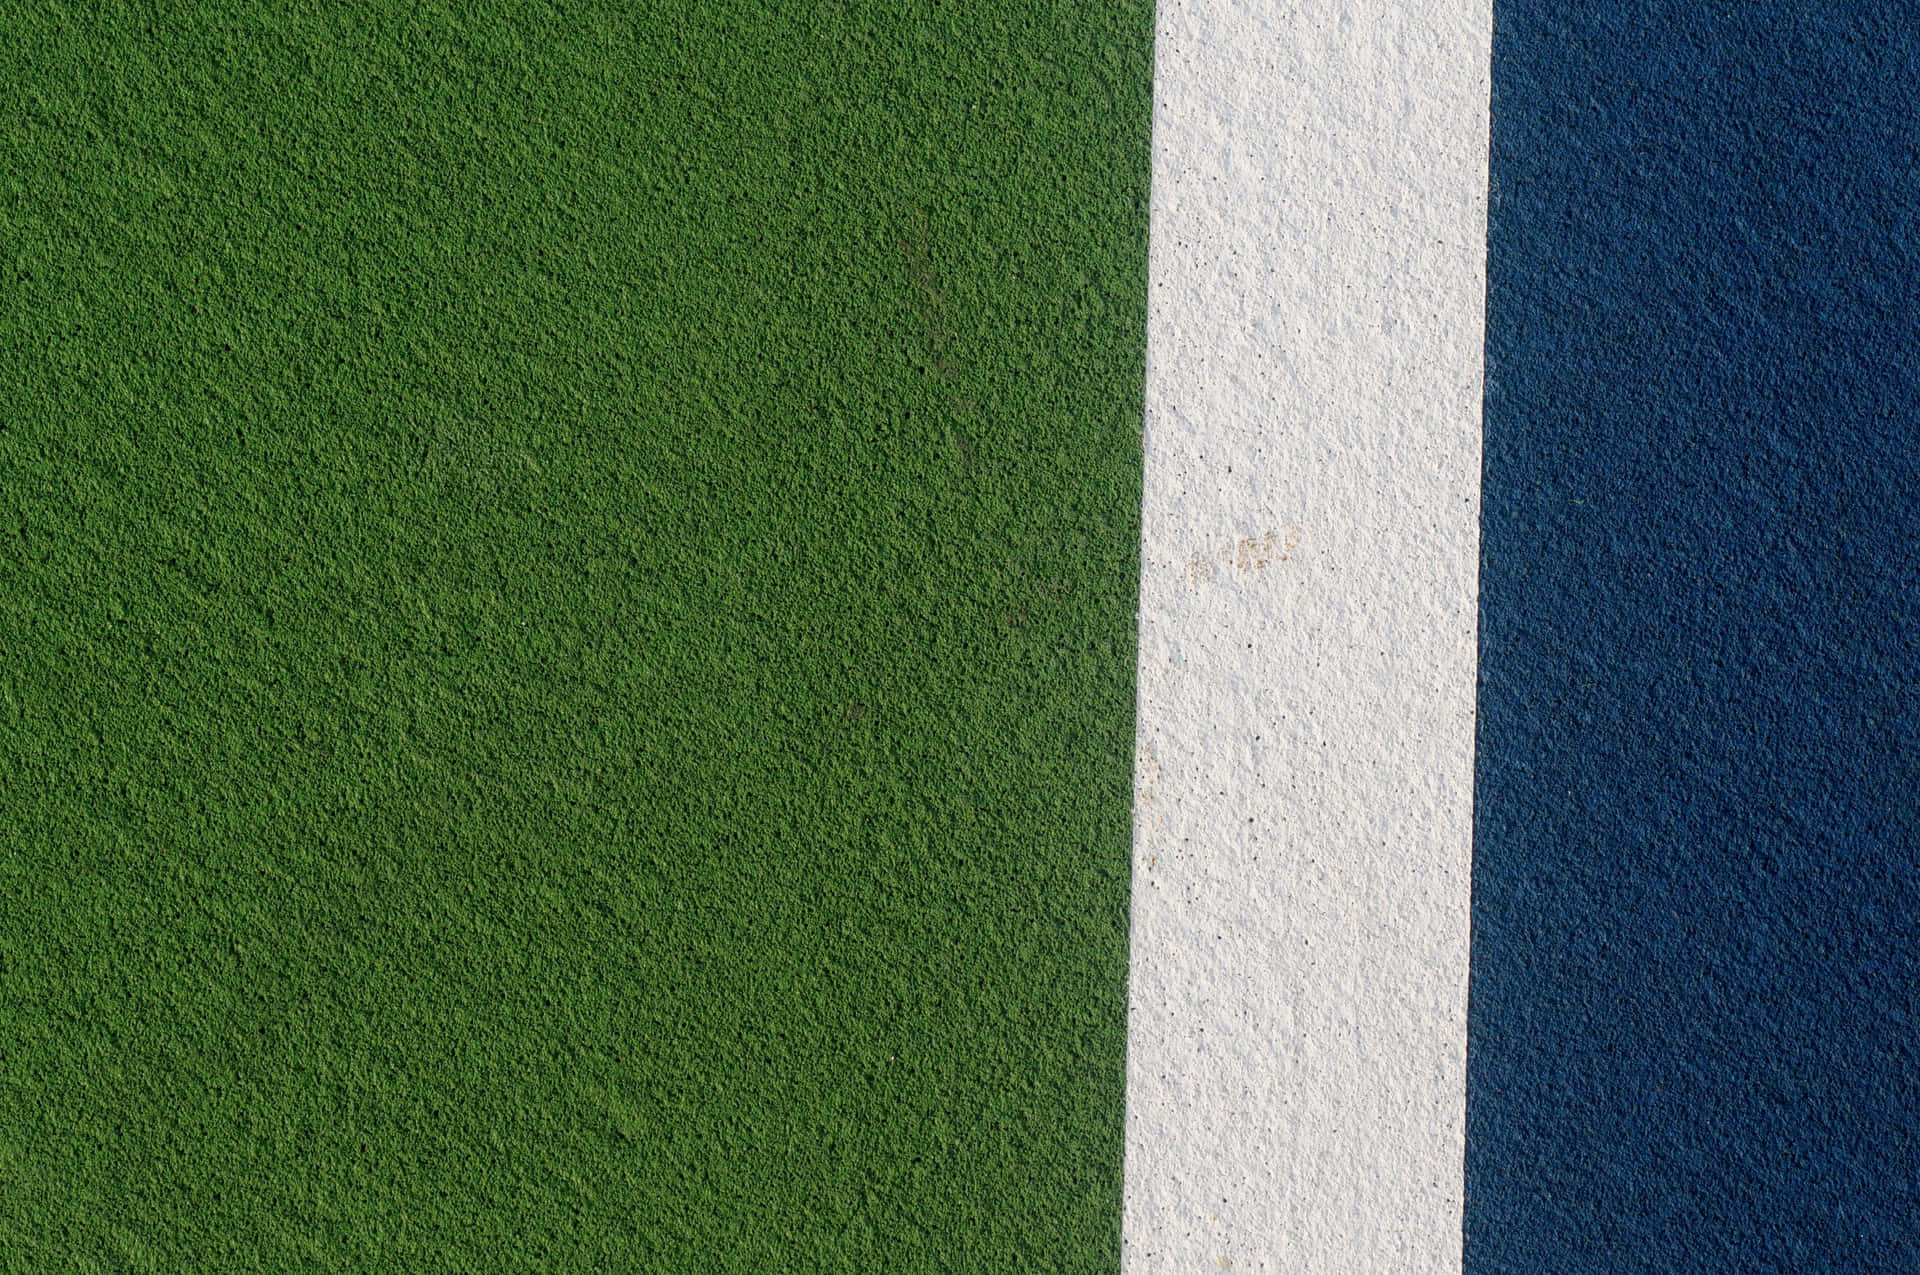 A Tennis Court With A White And Blue Line